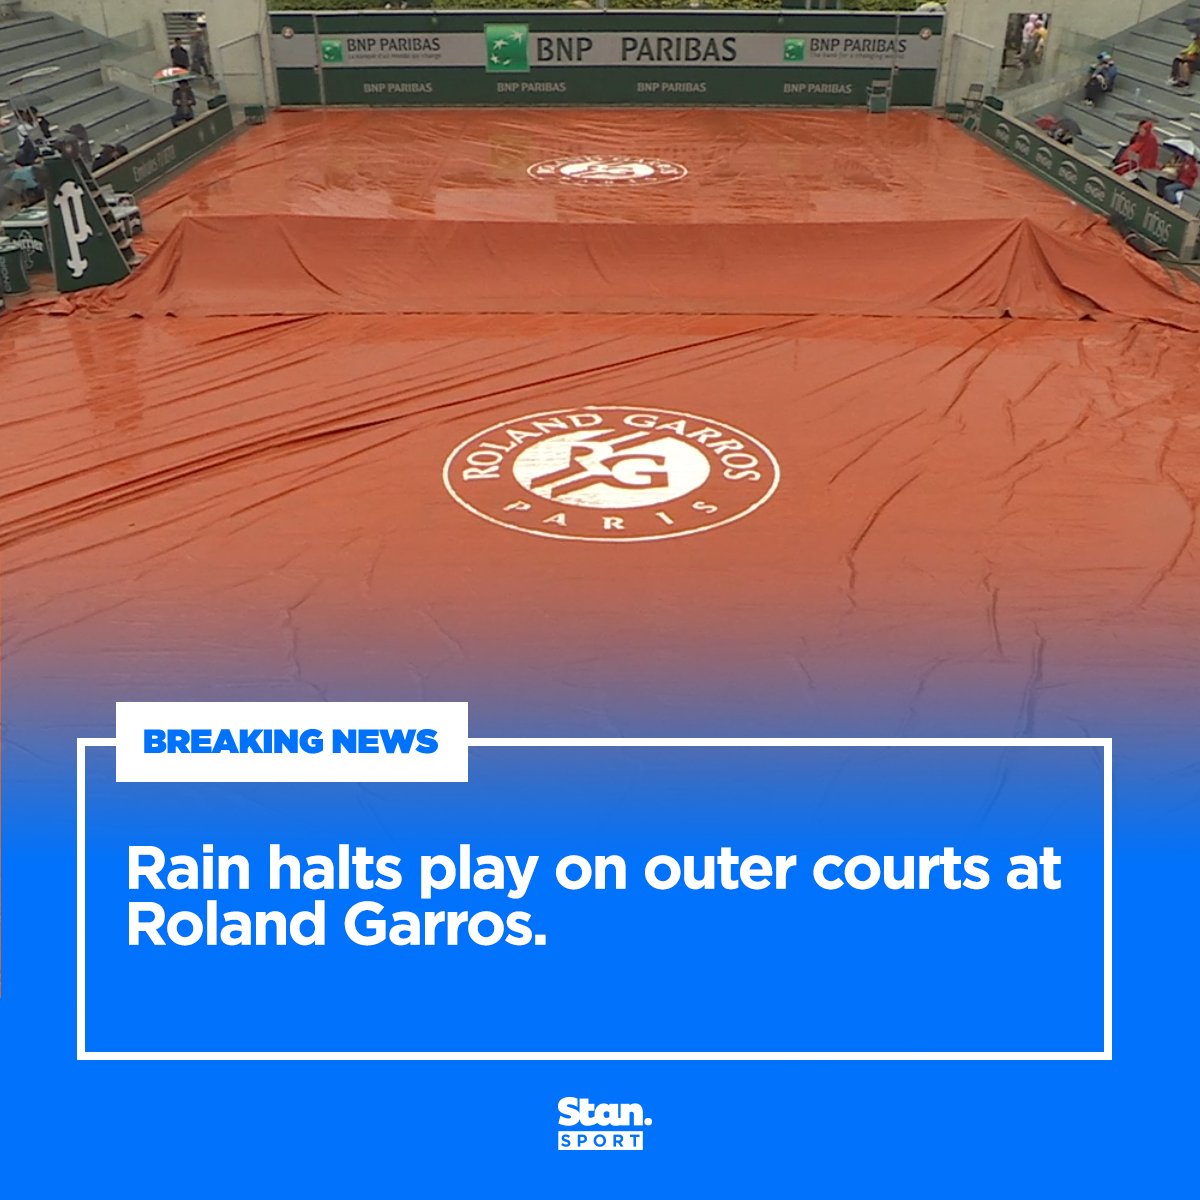 The weather is not playing ball on Day 2! 🌧️ Action continues on Suzanne Lenglen and Philippe-Chatrier! 🙌 ↳ Roland-Garros. Every Match. Ad-free. Live & On Demand. Four Courts in 4K UHD, on the Home of Grand Slam Tennis, Stan Sport. #StanSportAU #RolandGarros